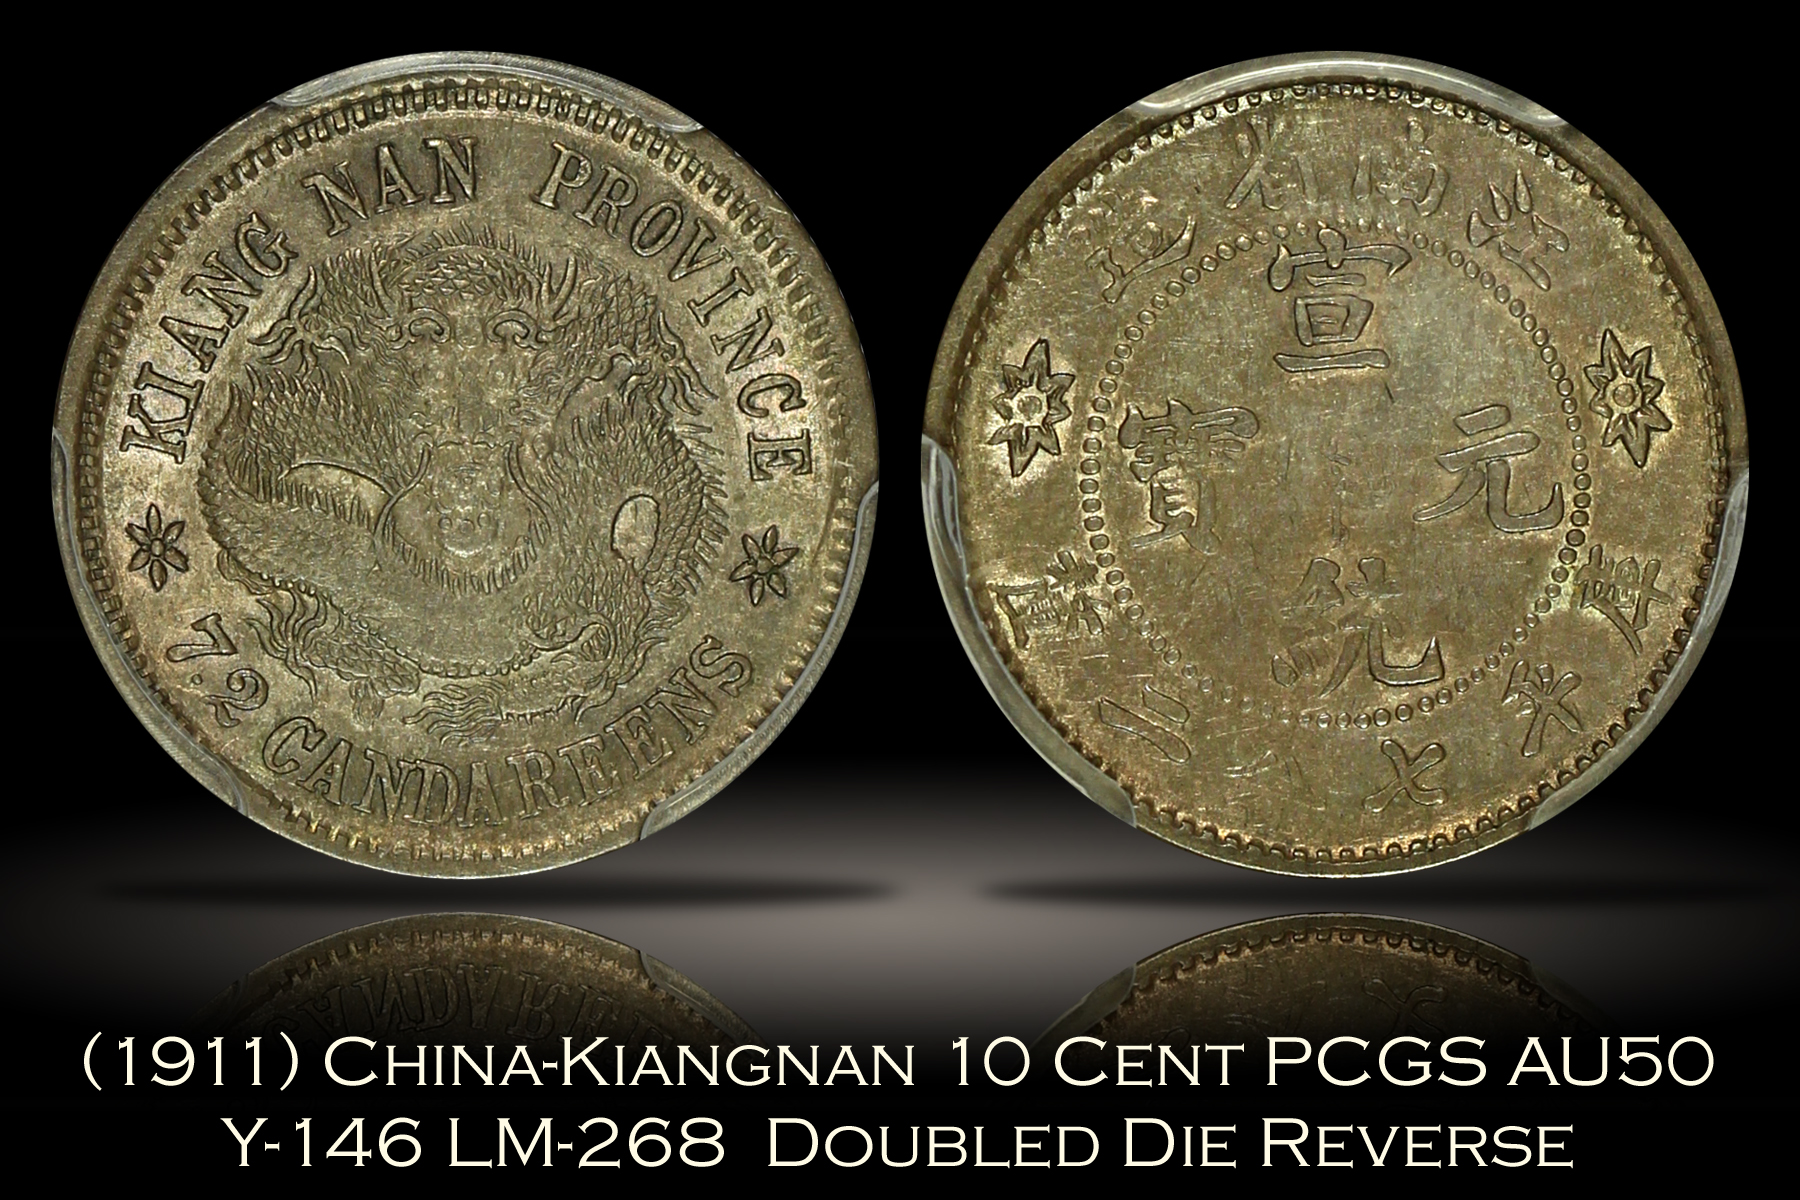 1911 China Kiangnan 10 Cent Doubled Die Reverse Y-146 LM-268 PCGS AU50